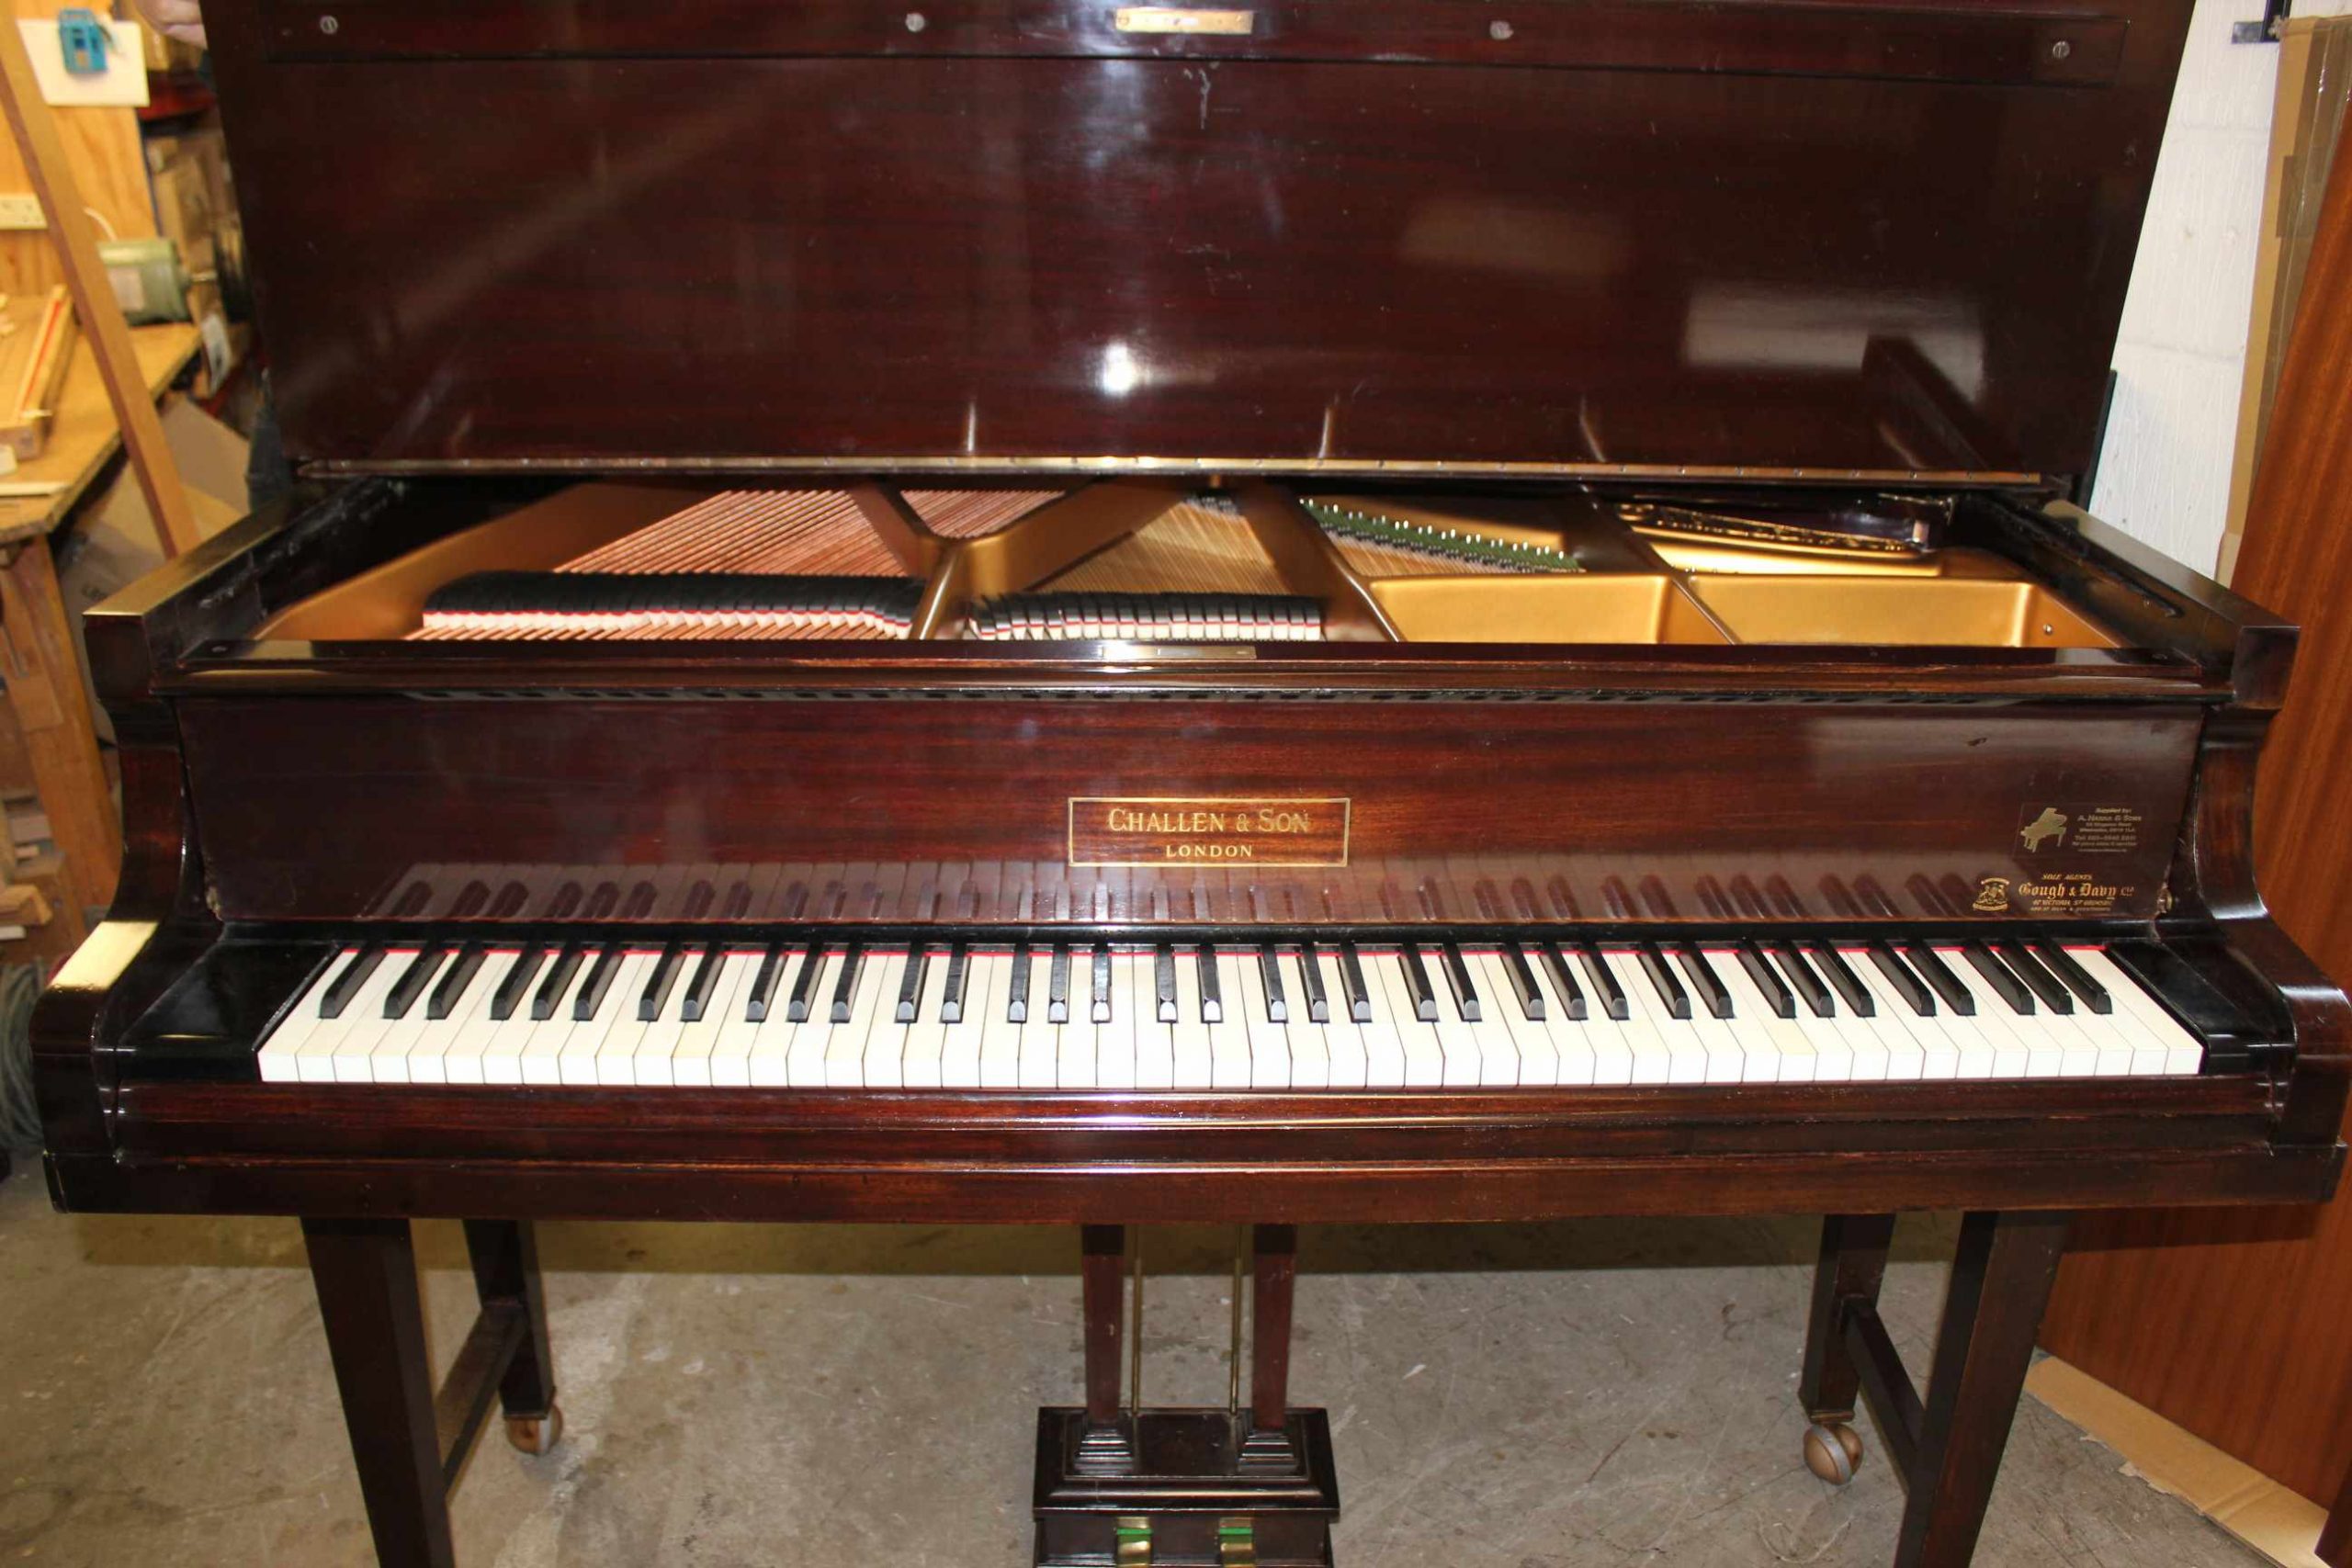 Challen antique baby grand piano front view